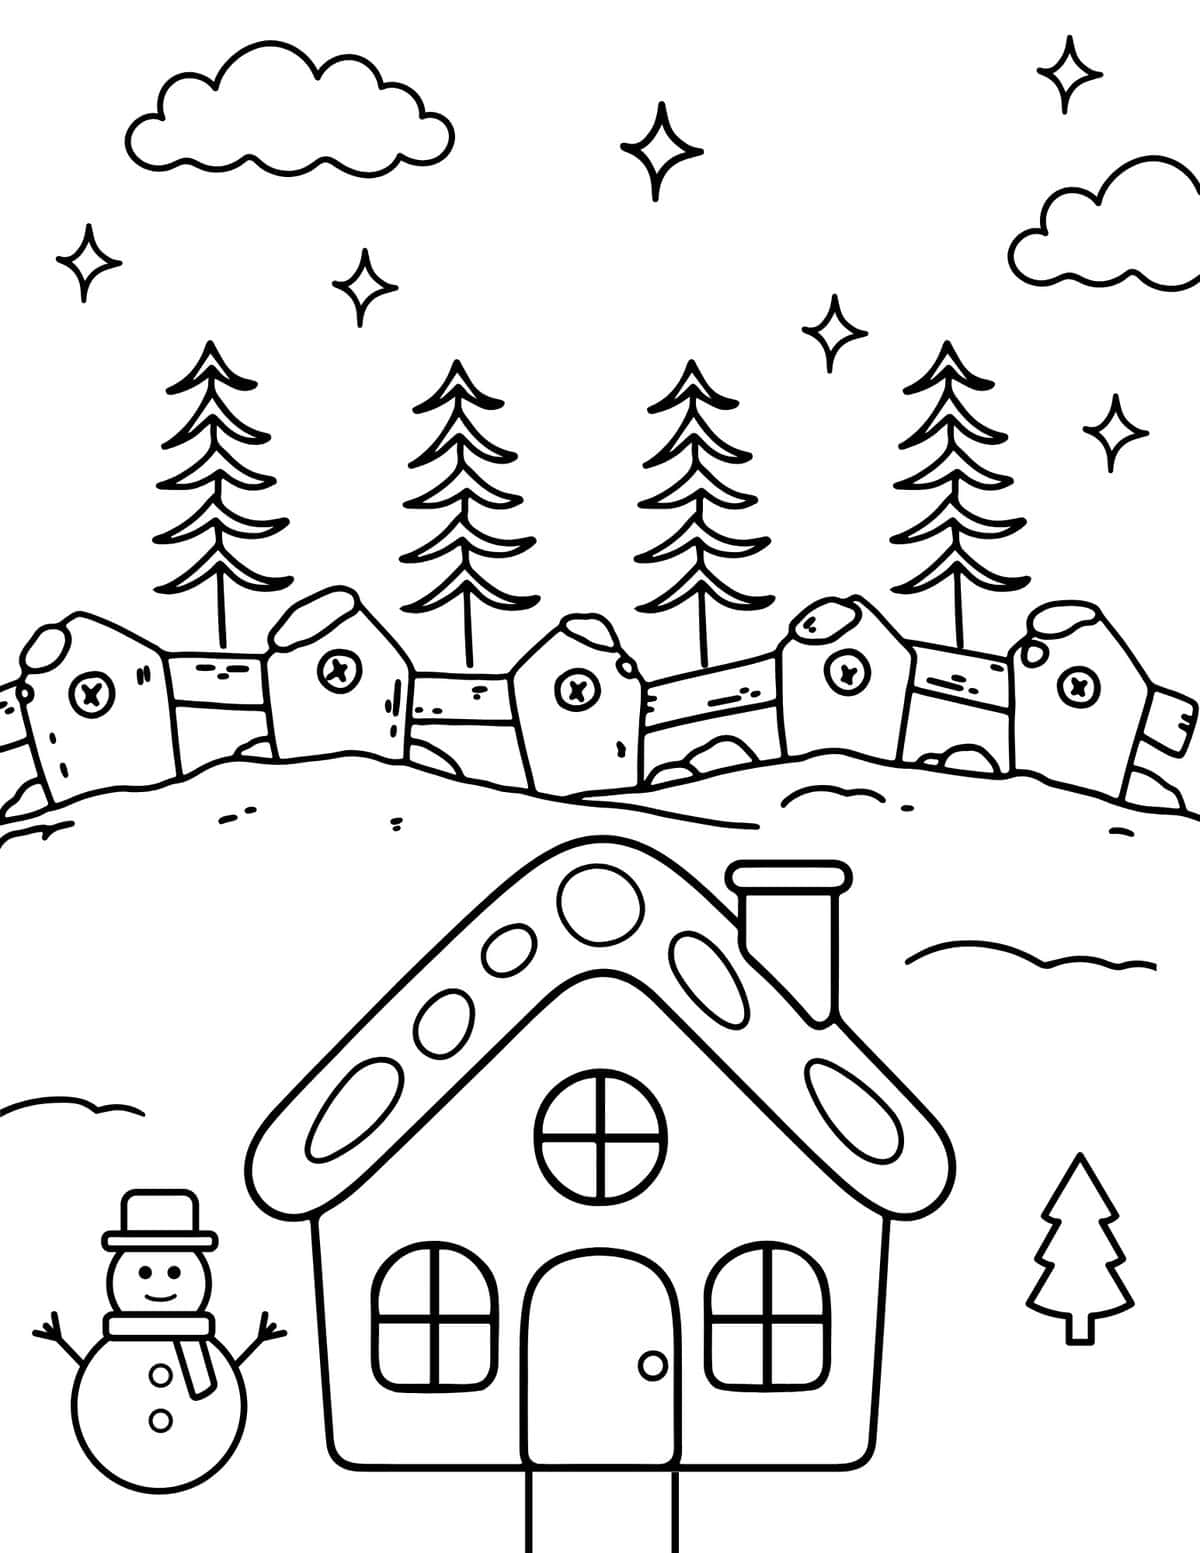 simple gingerbread house coloring page